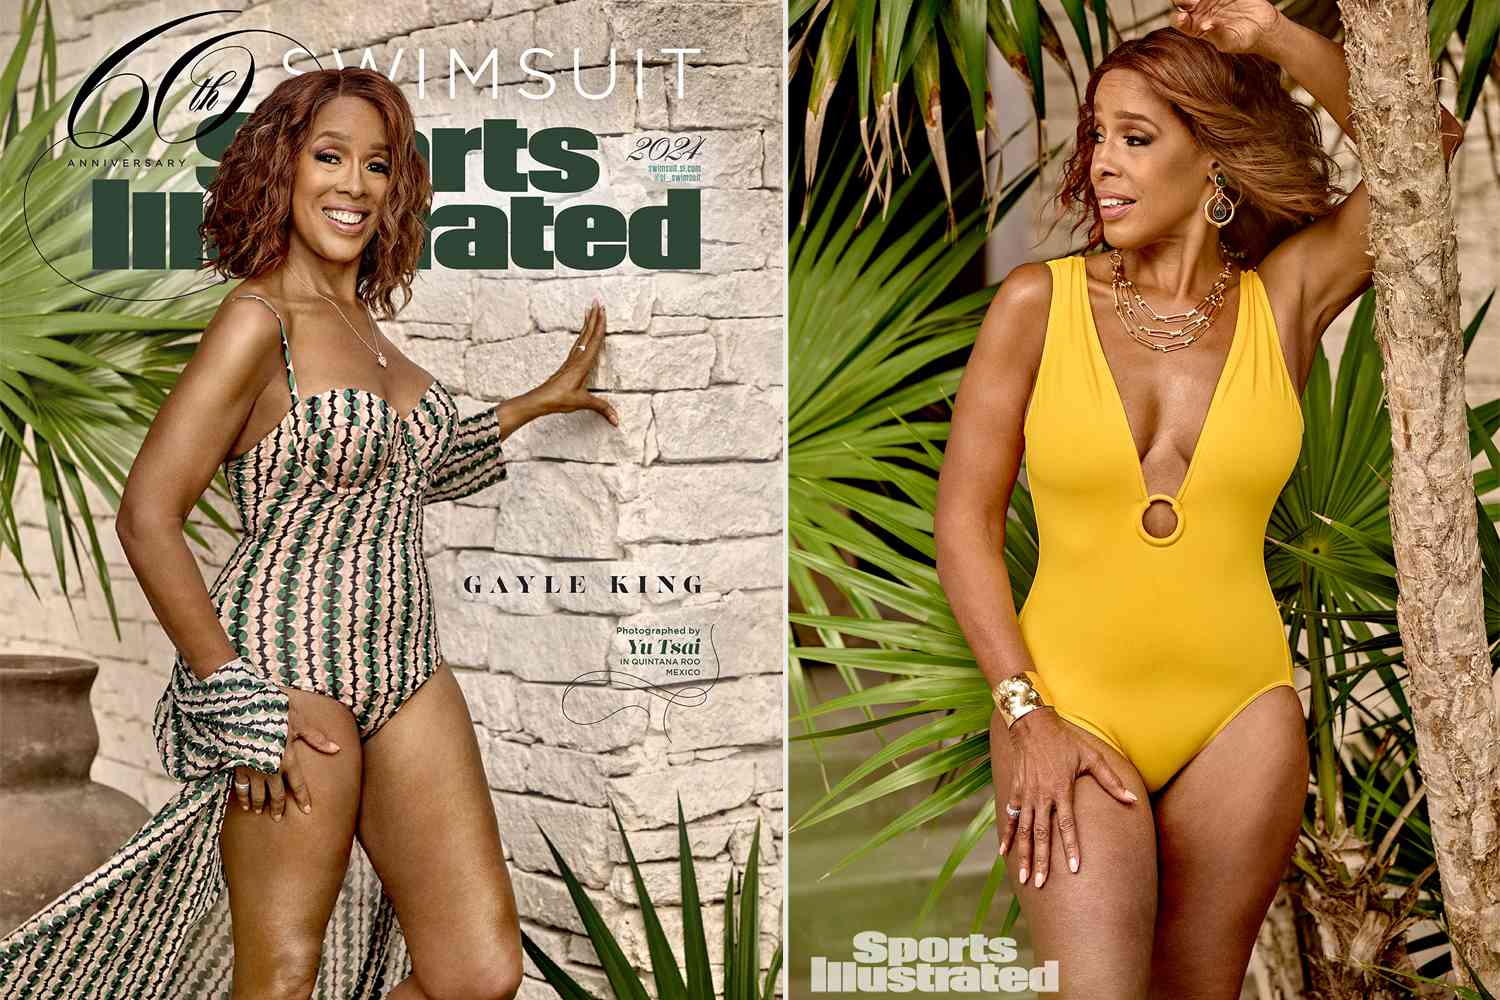 Gayle King on Being Shocked She’s a Sports Illustrated Swimsuit Cover Model and Why Oprah Told Her to ‘Go for It’